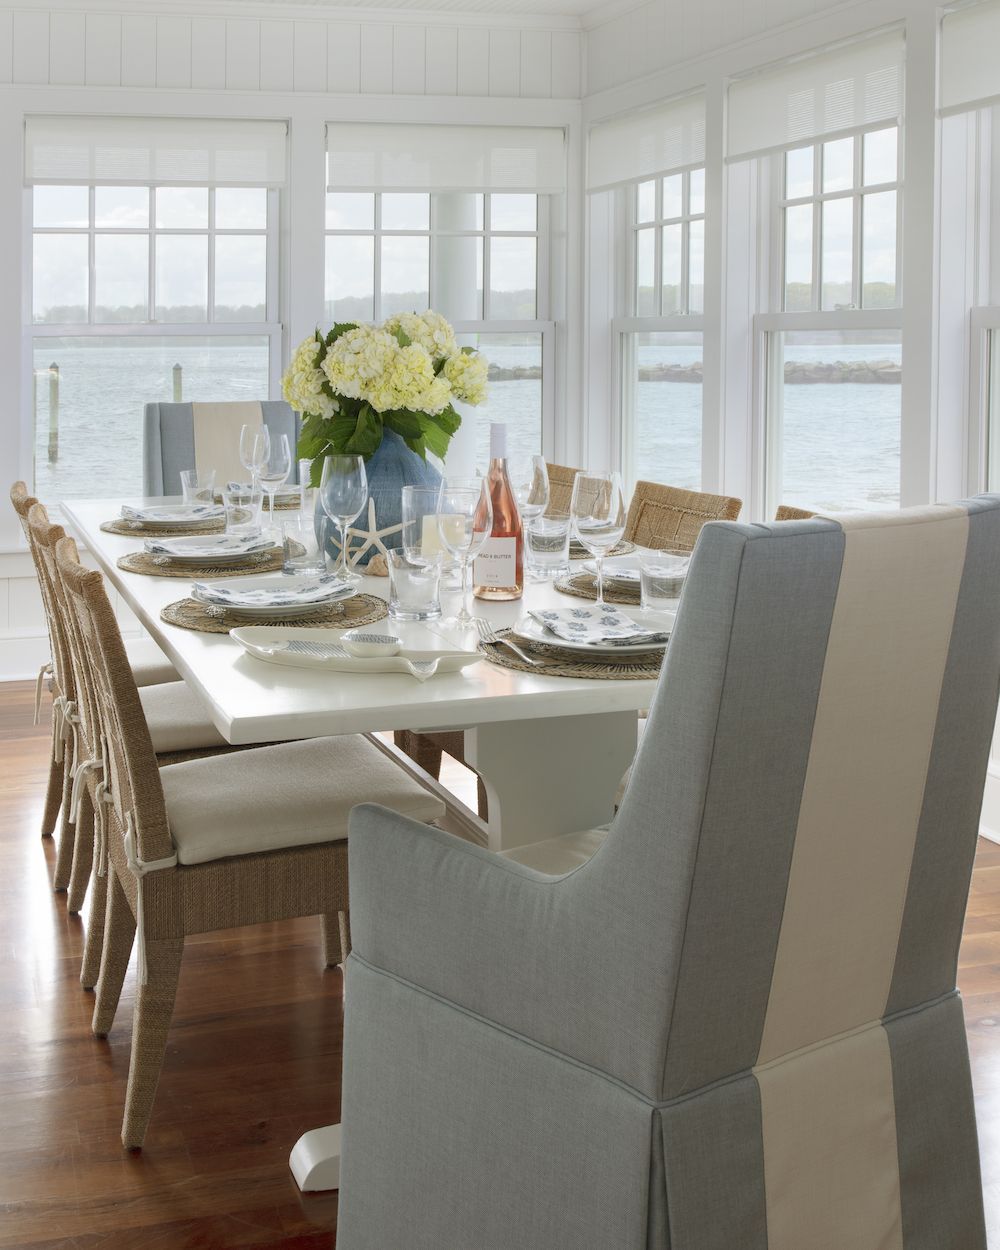 Coastal Dining Room with Blue Stripe Chair via Elements of Style